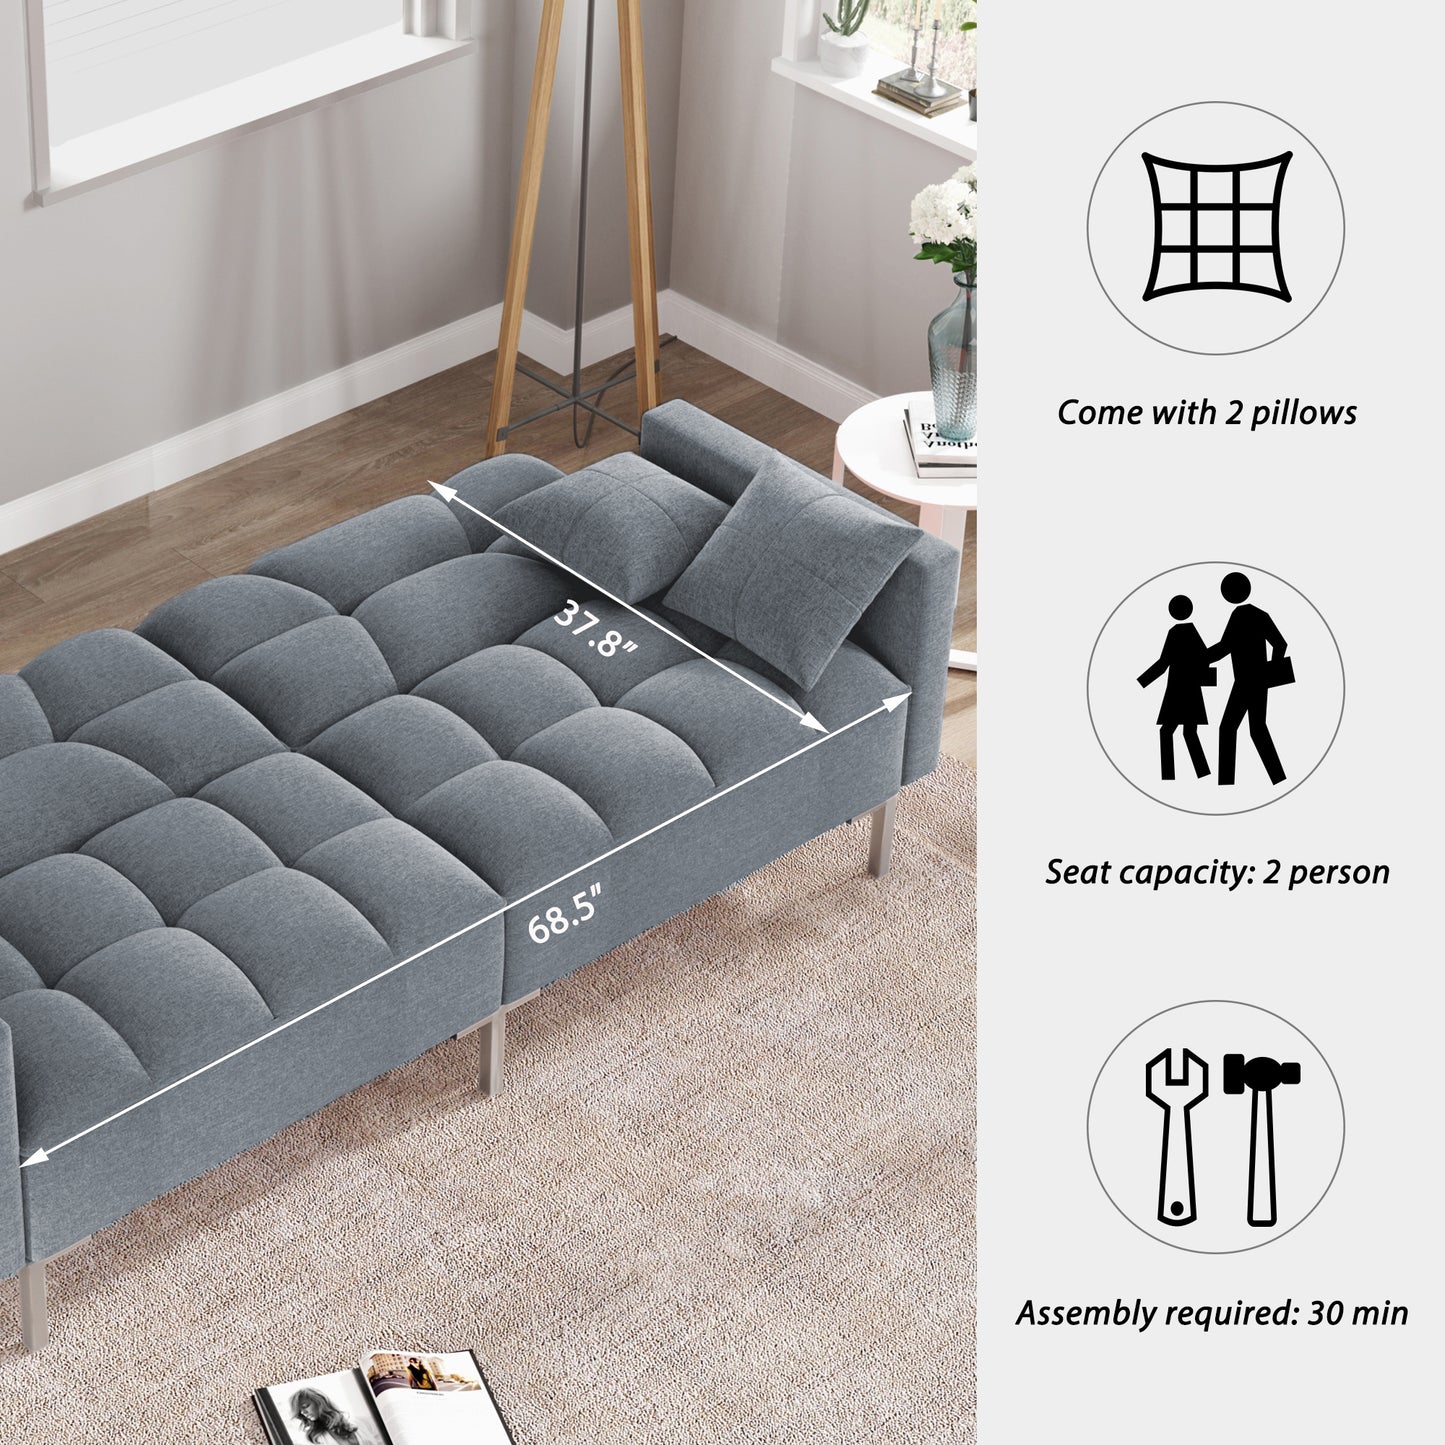 Modern Linen Upholstered Convertible Folding Futon Sofa Bed for Compact Living Space, an Apartment or Dorm